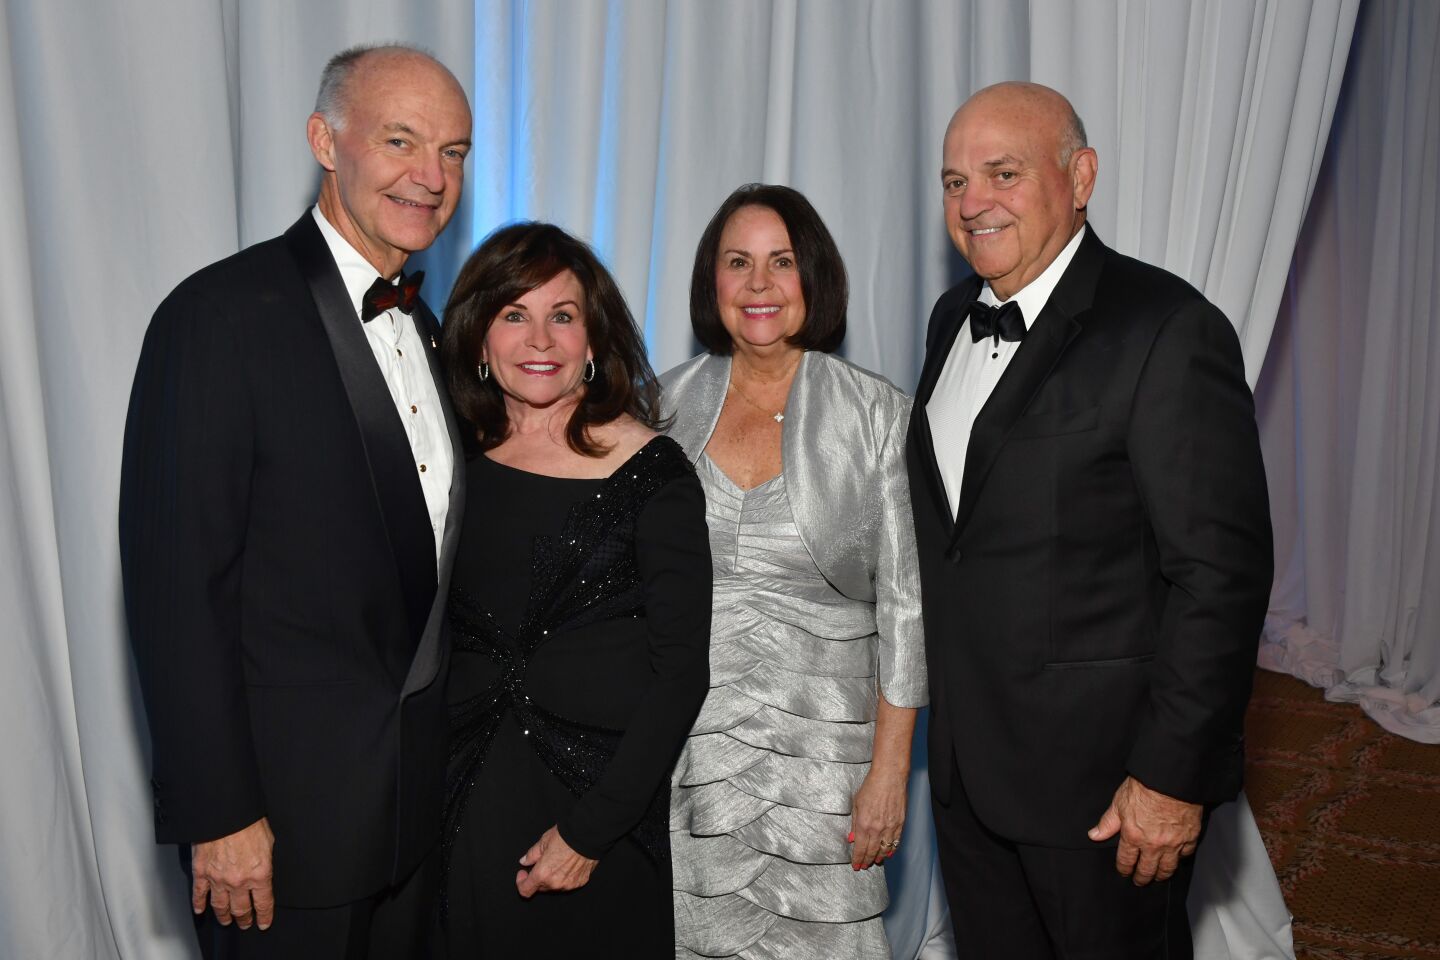 Dr. Donald Kearns (Rady Children’s Hospital president emeritus) and Dr. Jean Wickersham, Jeanne and Ted Roth